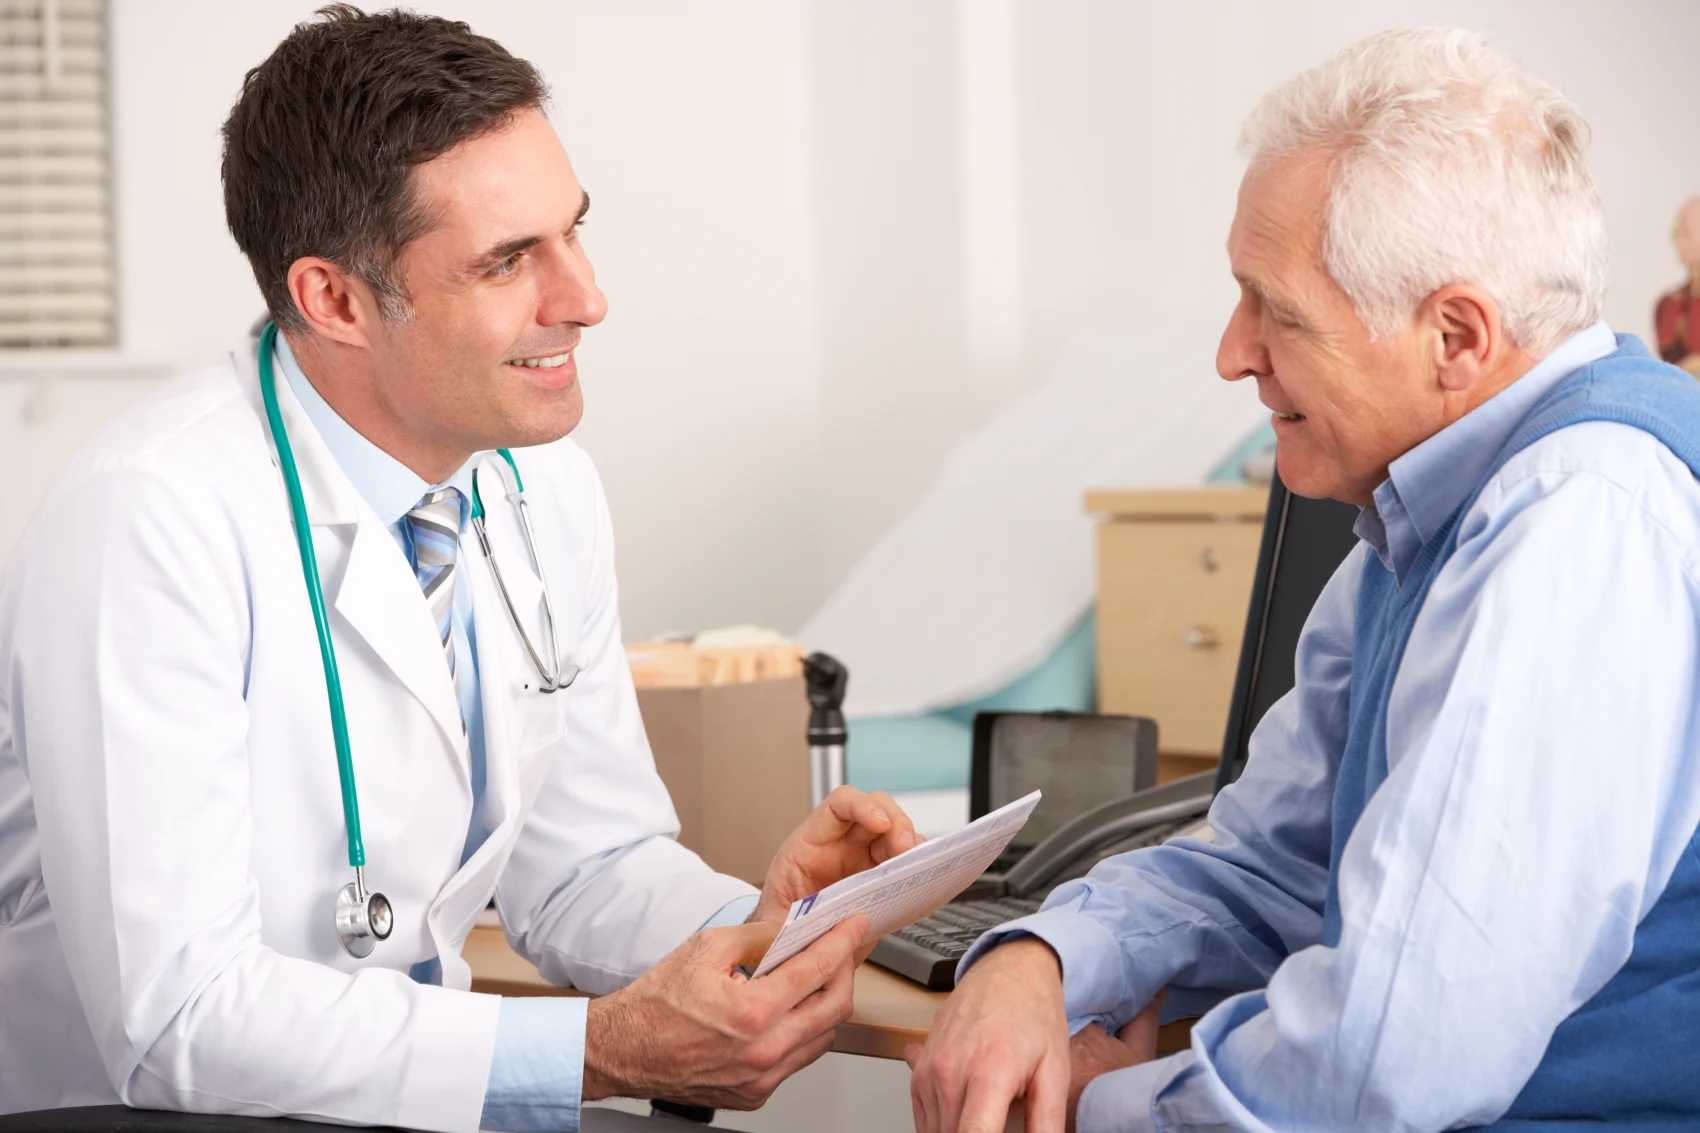 Smiling doctor talking to a senior man during an oncology consultation.